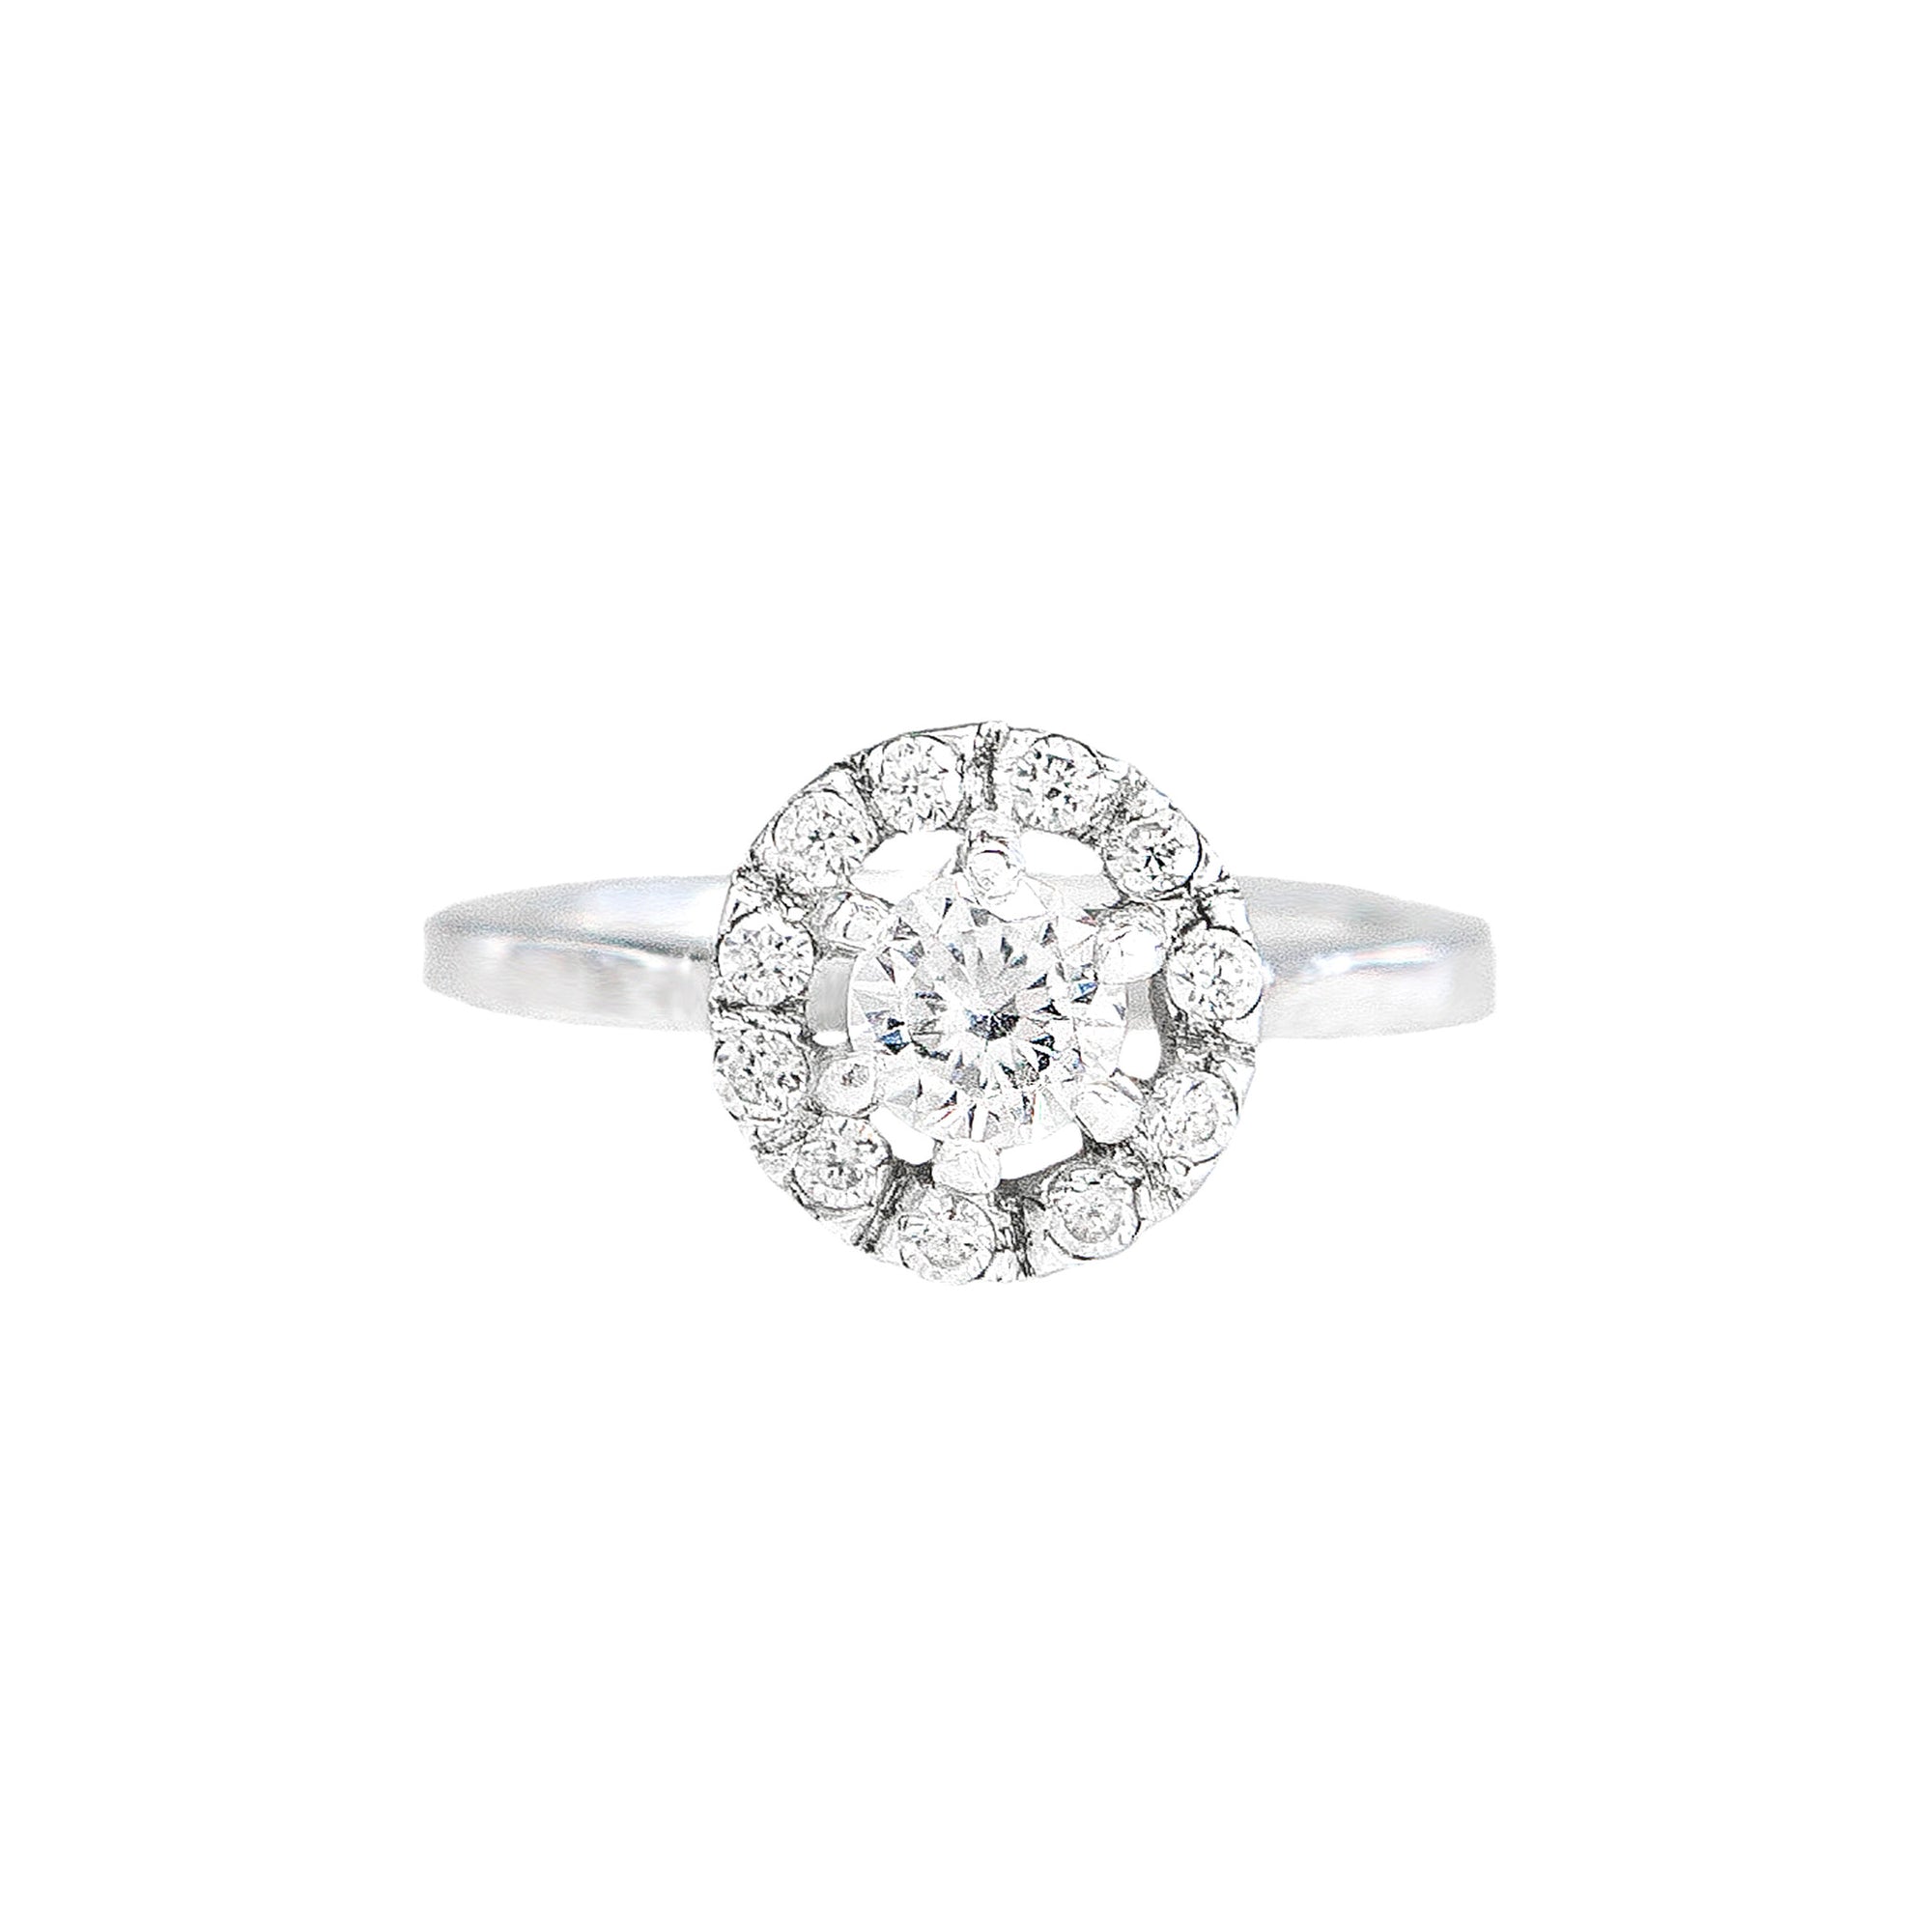 Colette Ethical Halo Engagement Ring